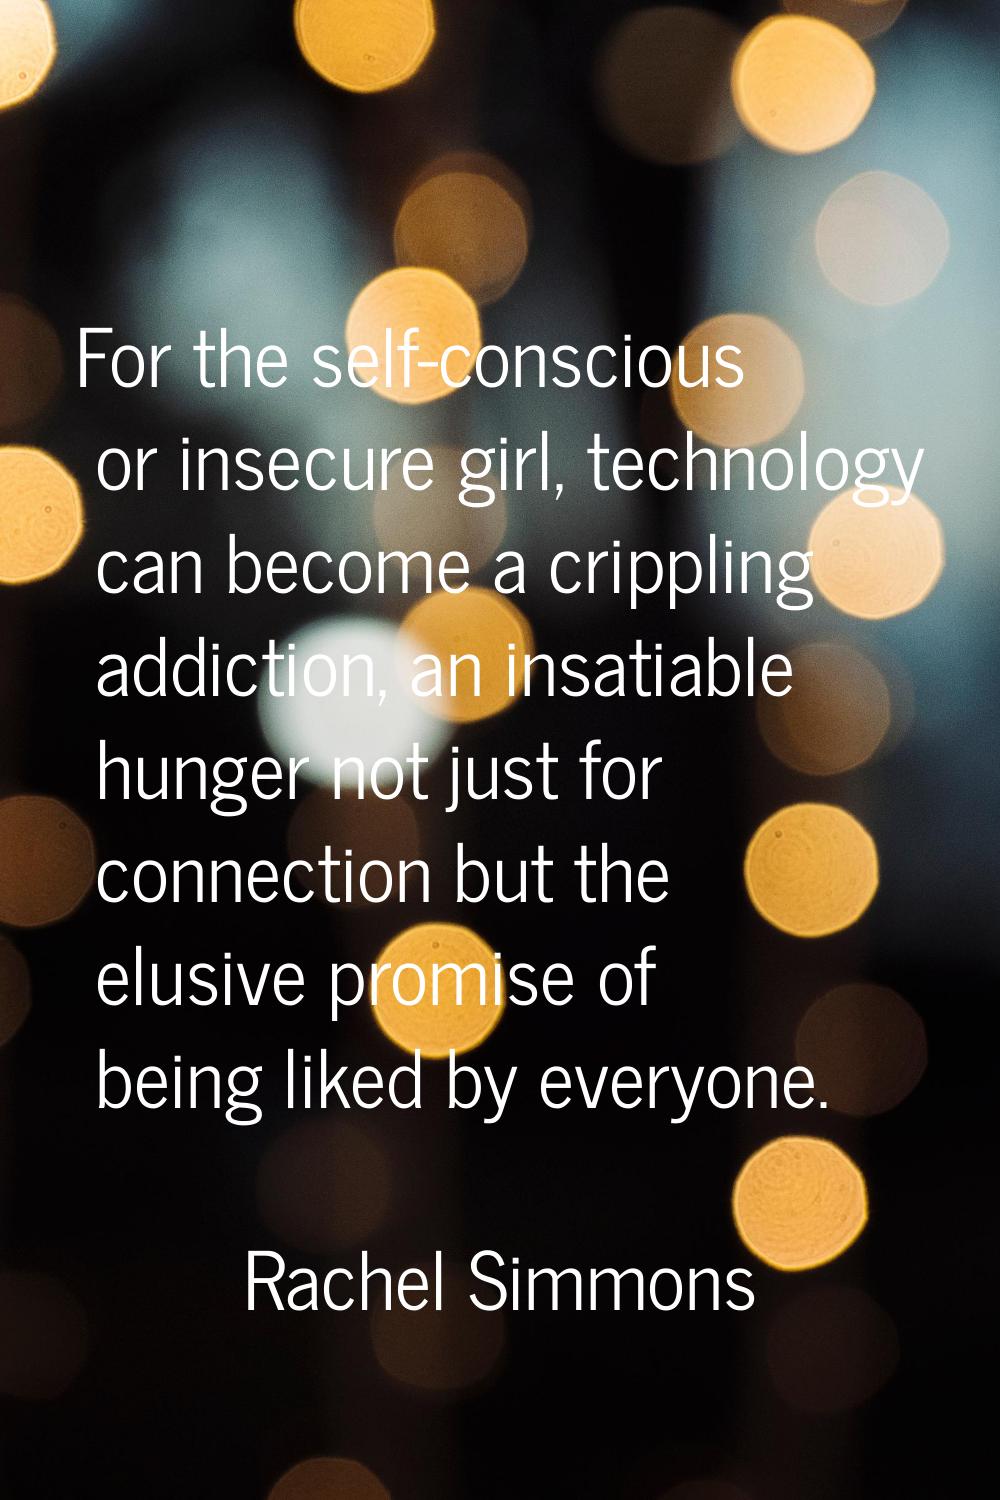 For the self-conscious or insecure girl, technology can become a crippling addiction, an insatiable